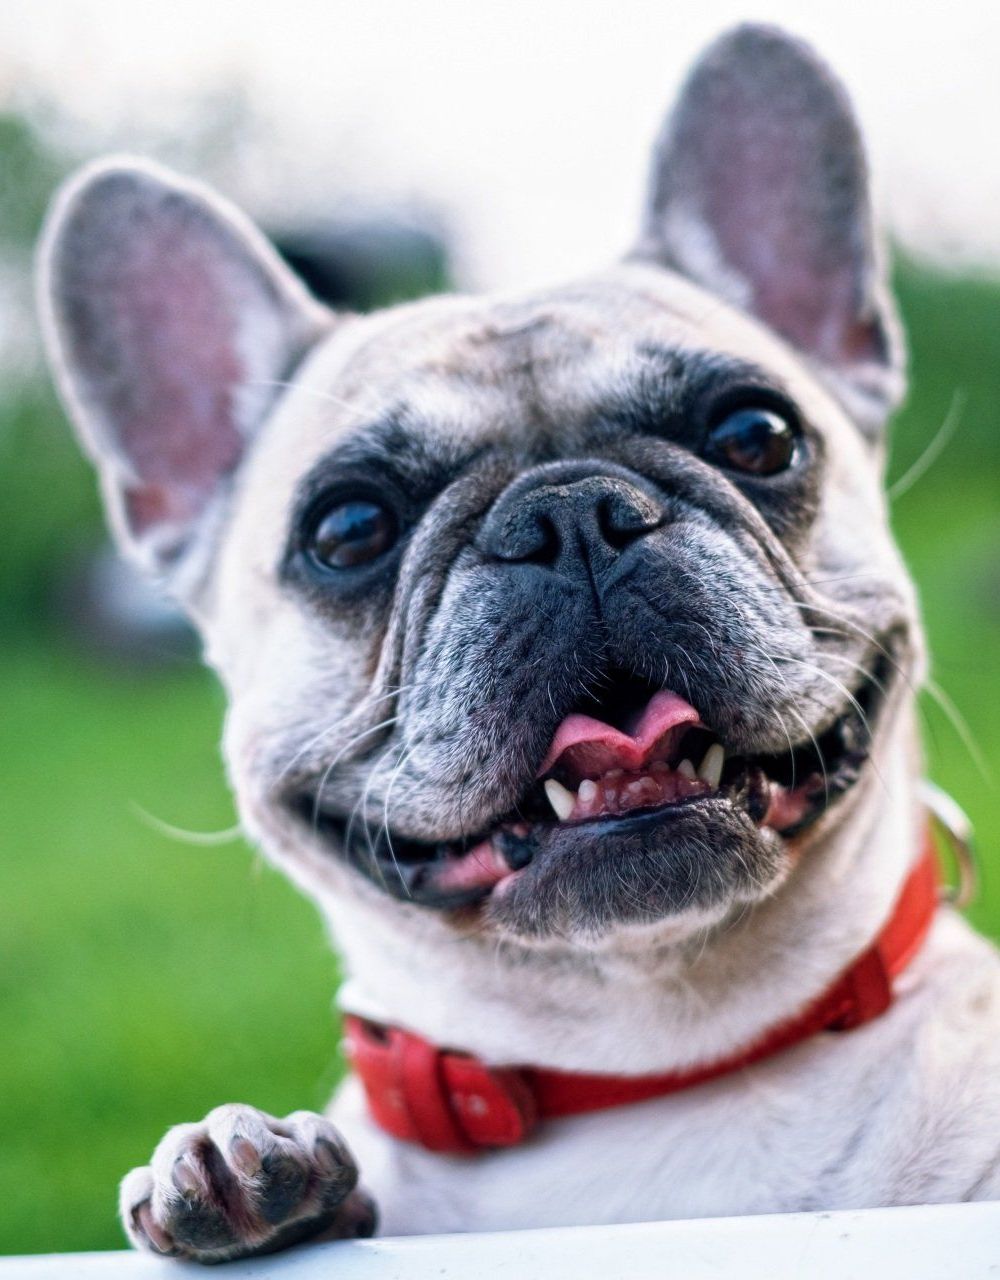 A close up of a french bulldog wearing a red collar